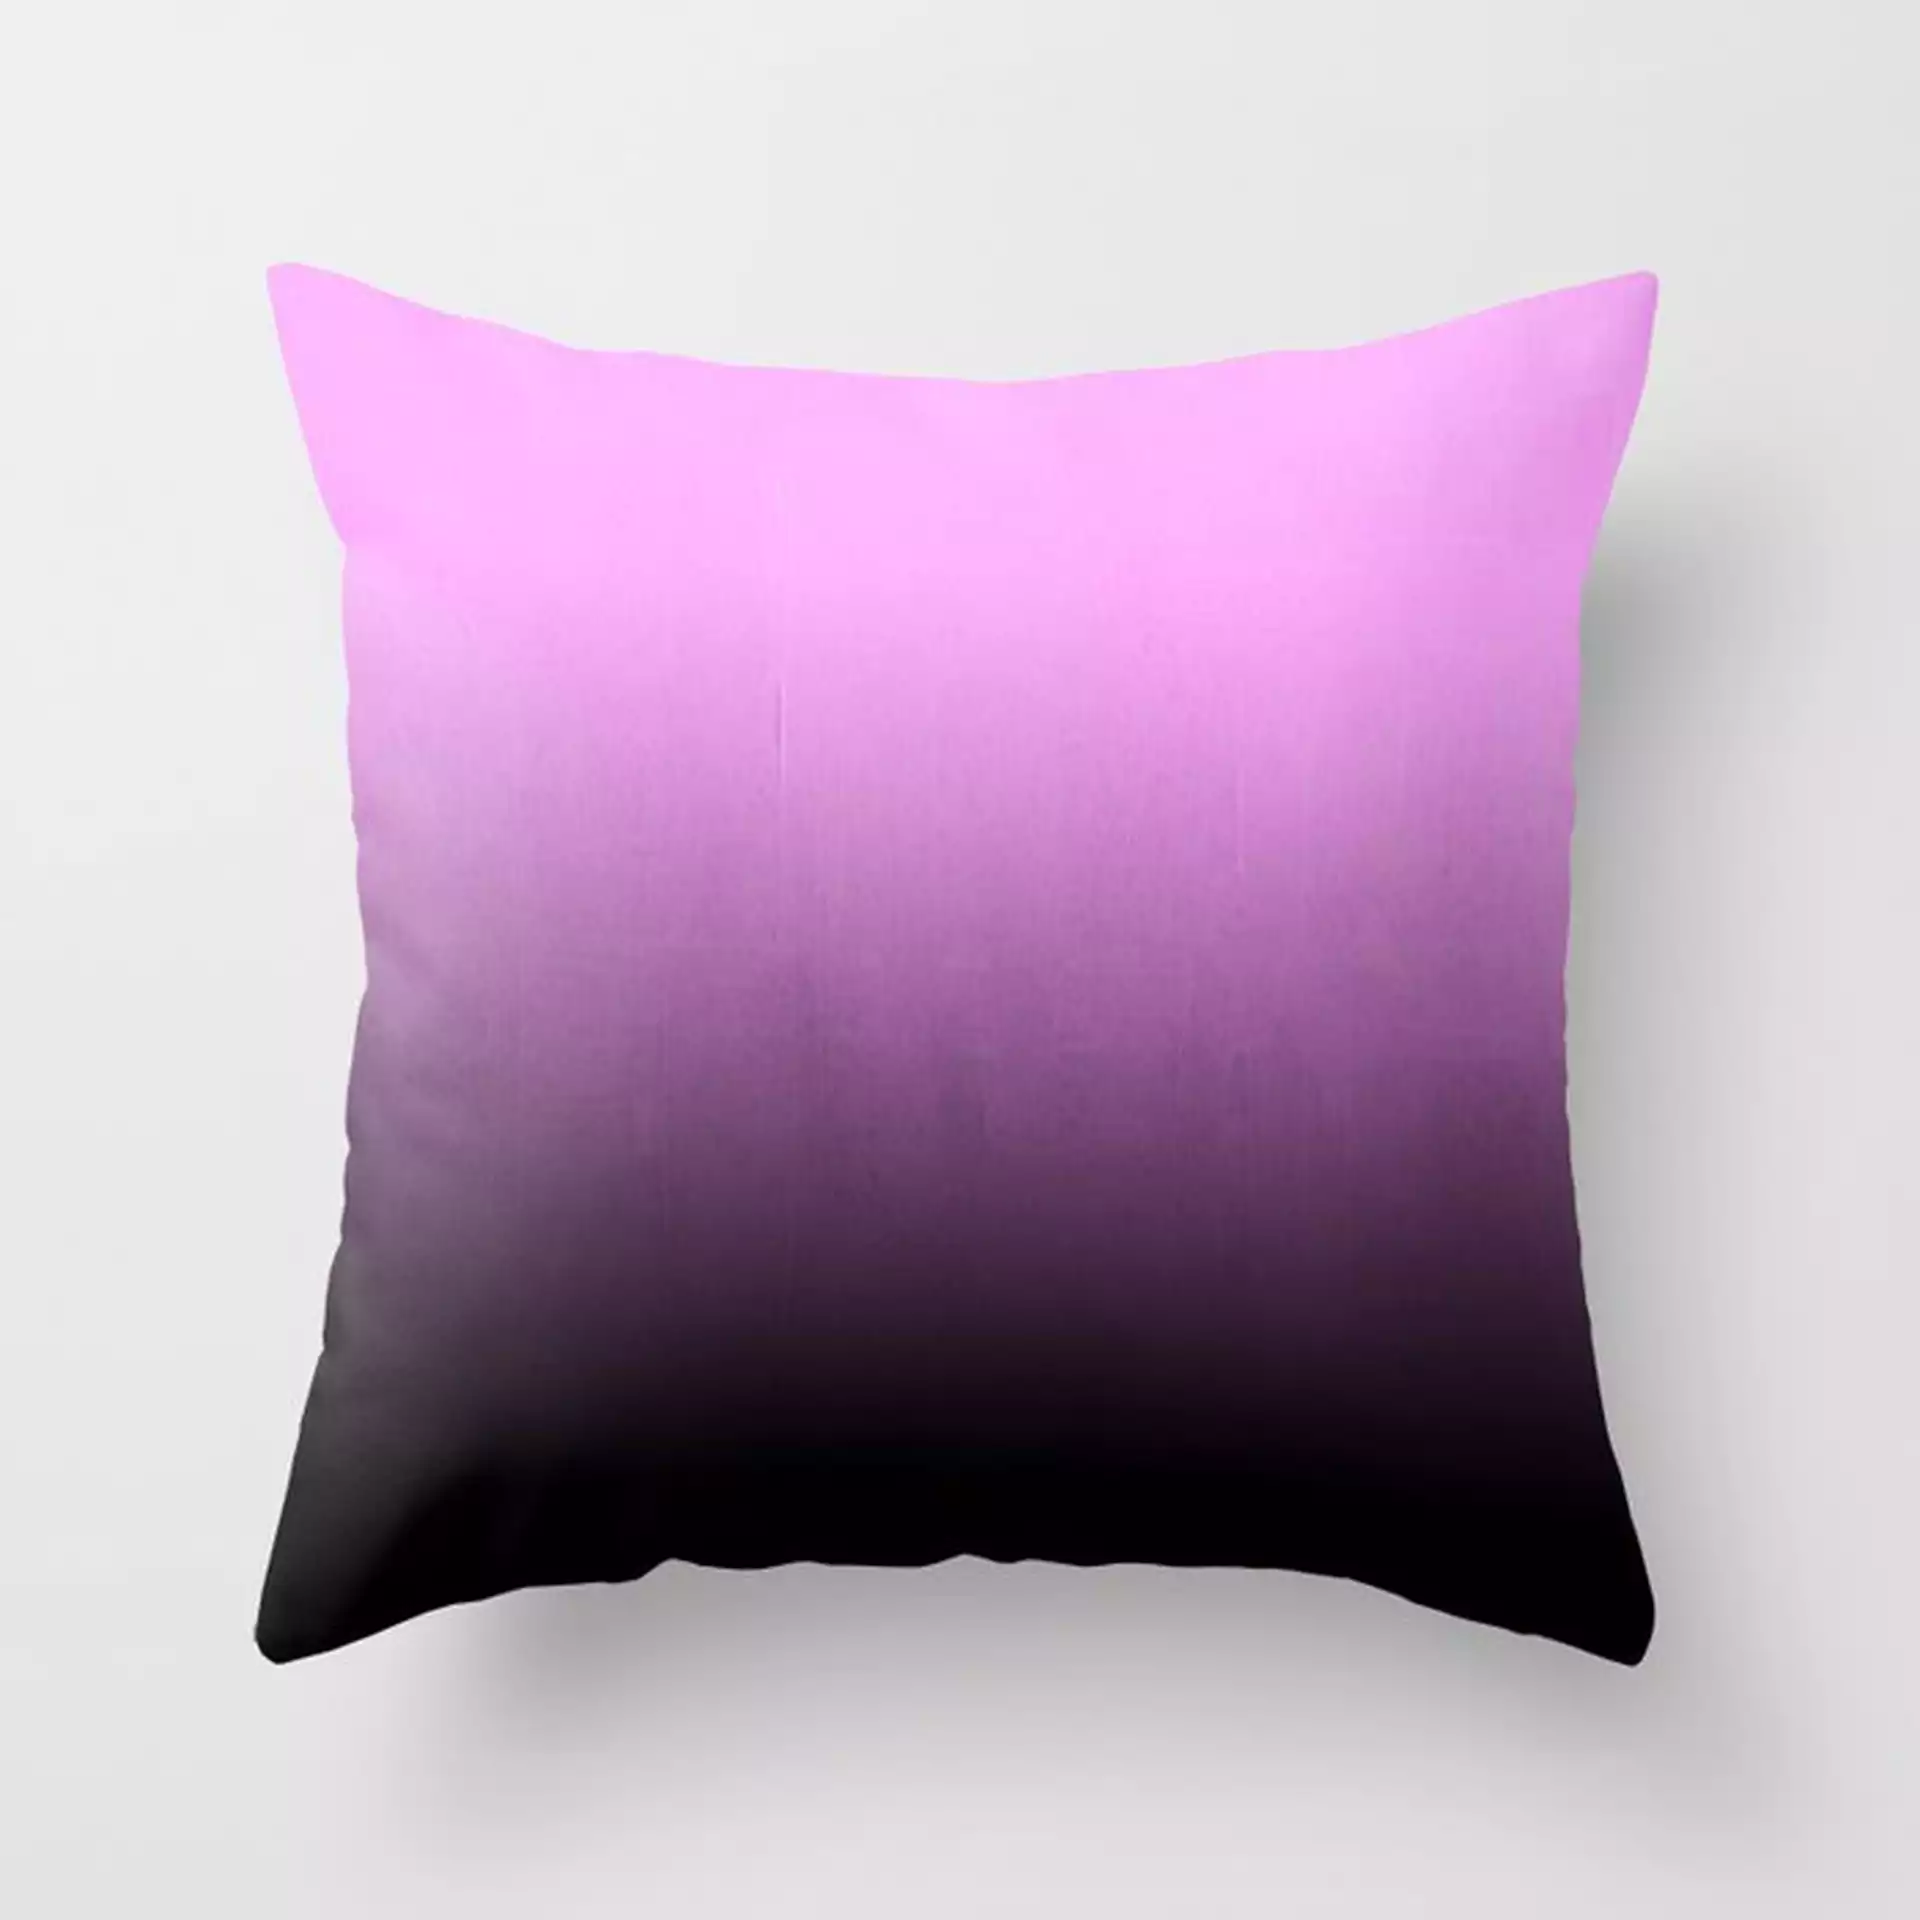 Lauree - Ombre Purple Violet Pantone Gradient Color Splash Decor Minimalist Couch Throw Pillow by Charlottewinter - Cover (18" x 18") with pillow insert - Outdoor Pillow